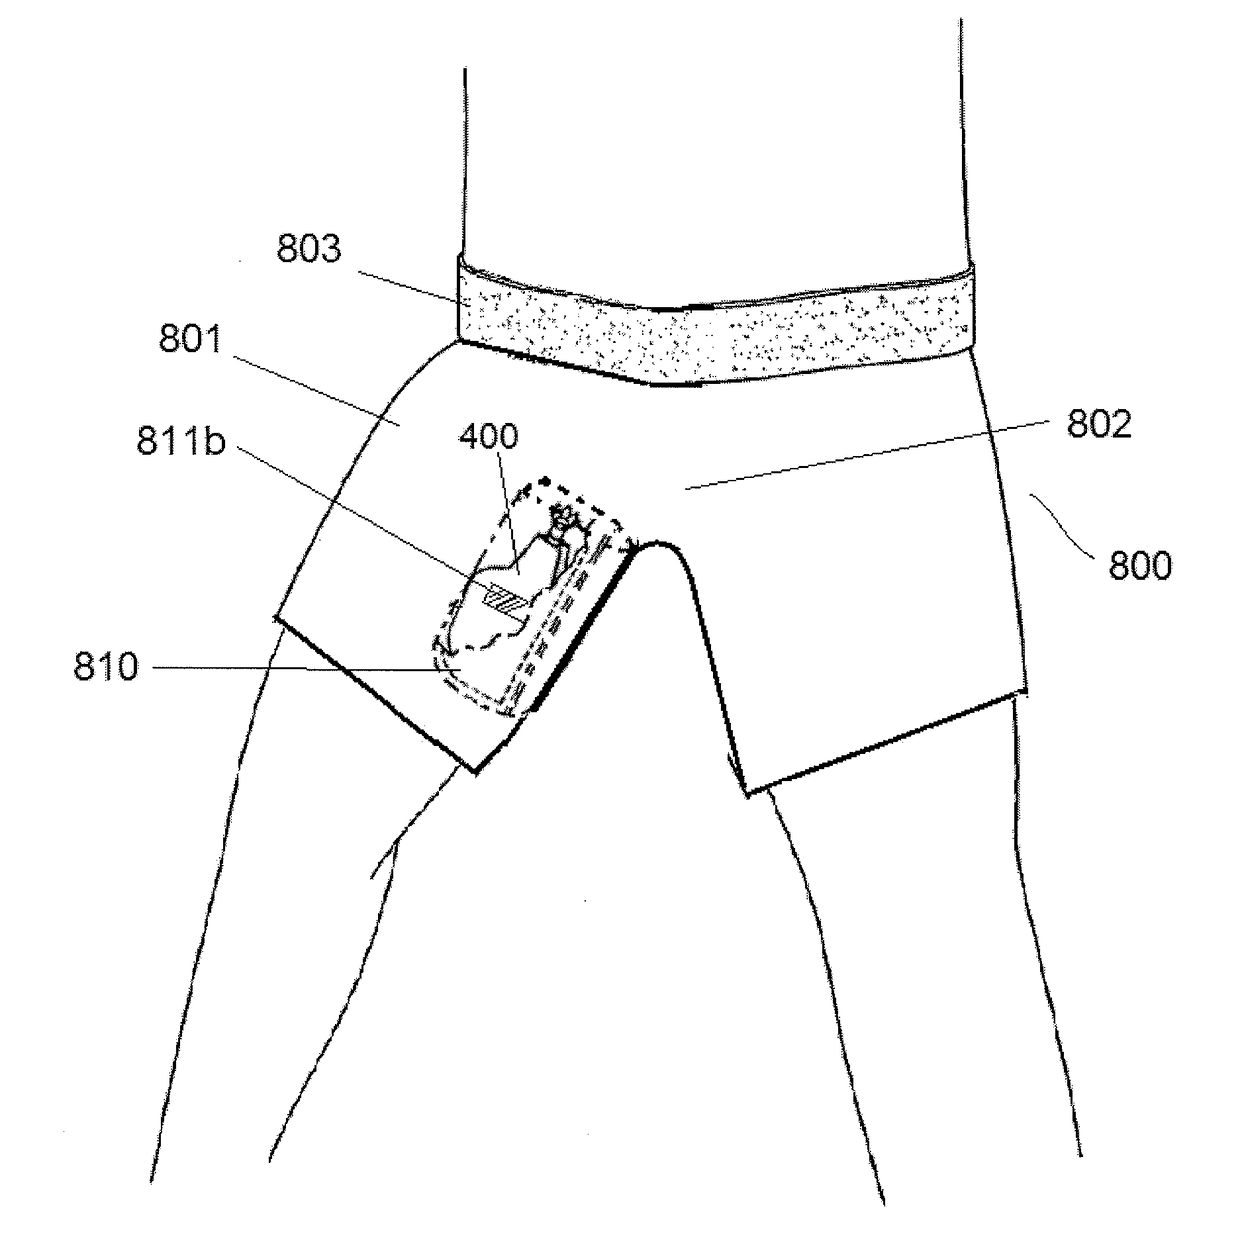 Incontinence collection device and related methods